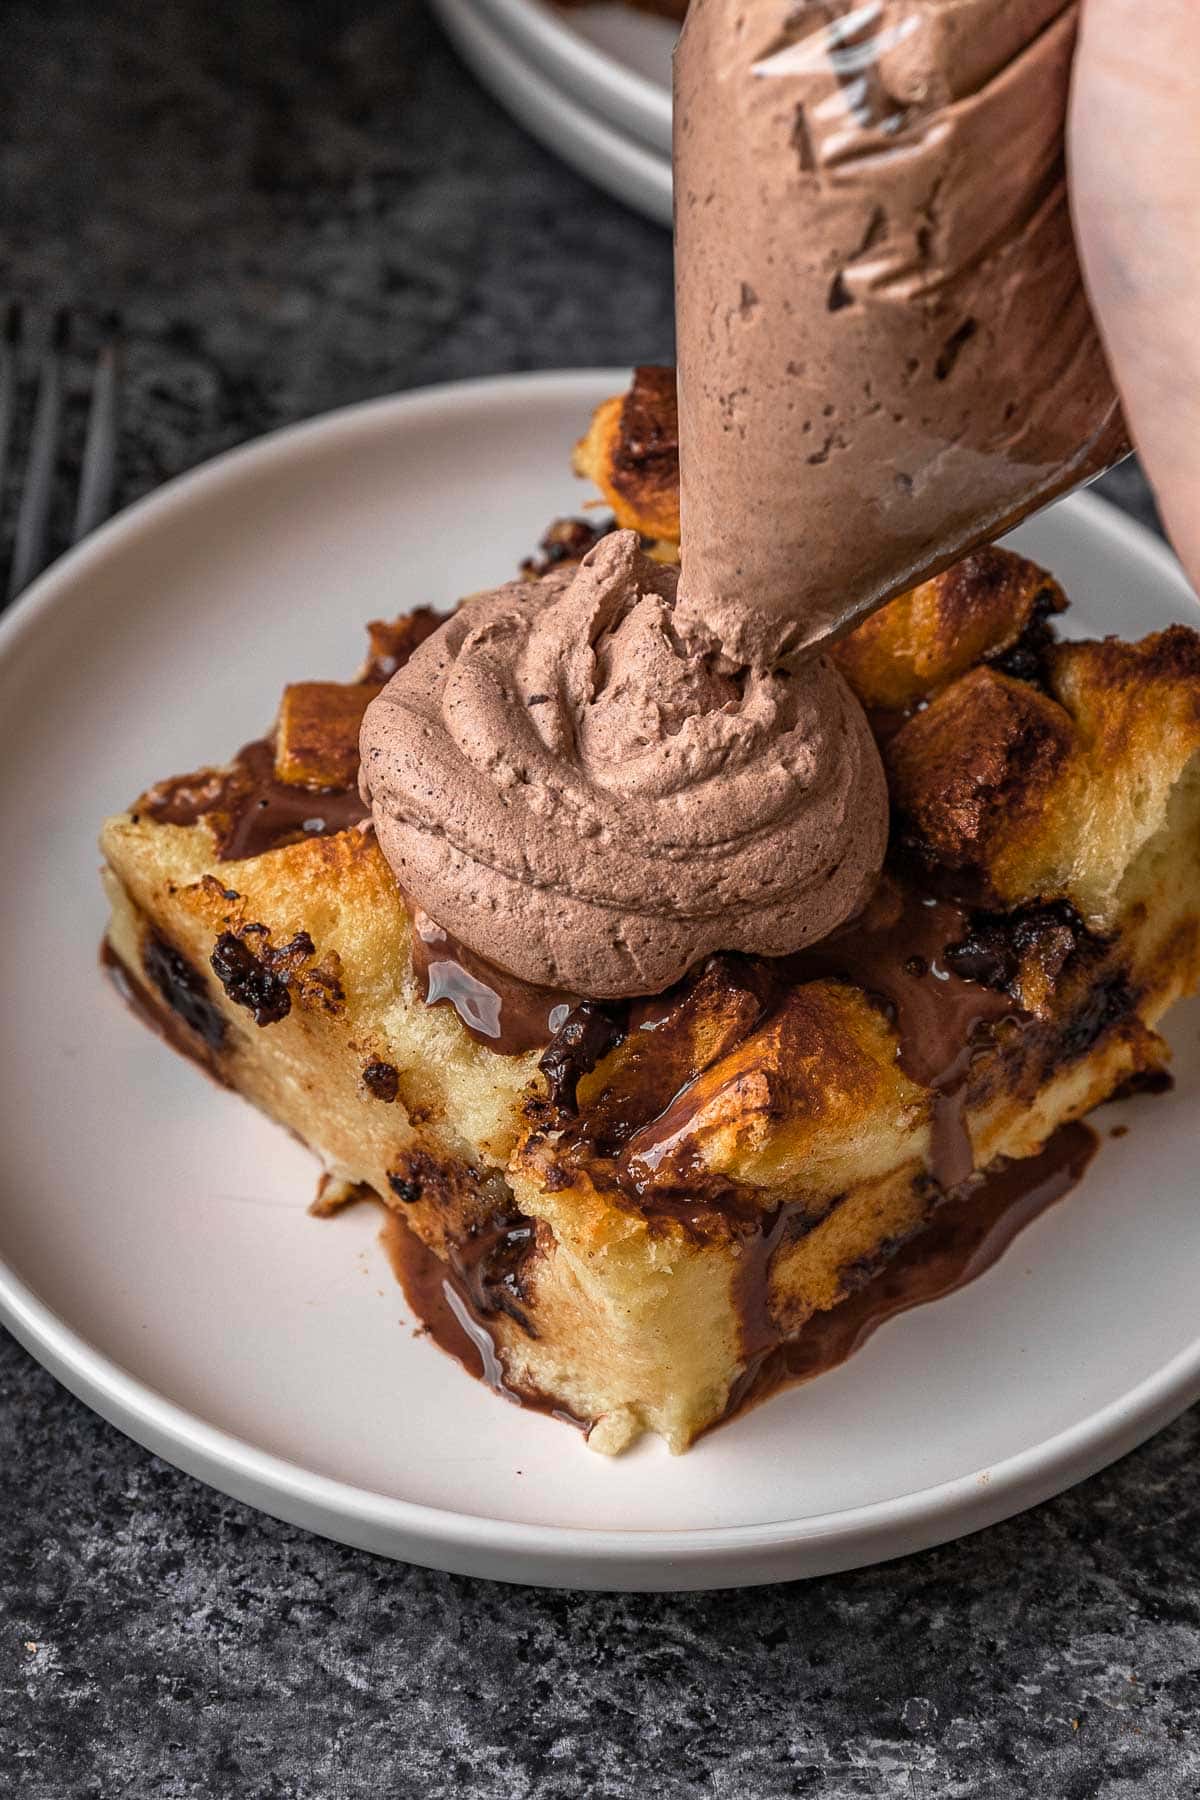 Chocolate Whipped Cream on bread pudding